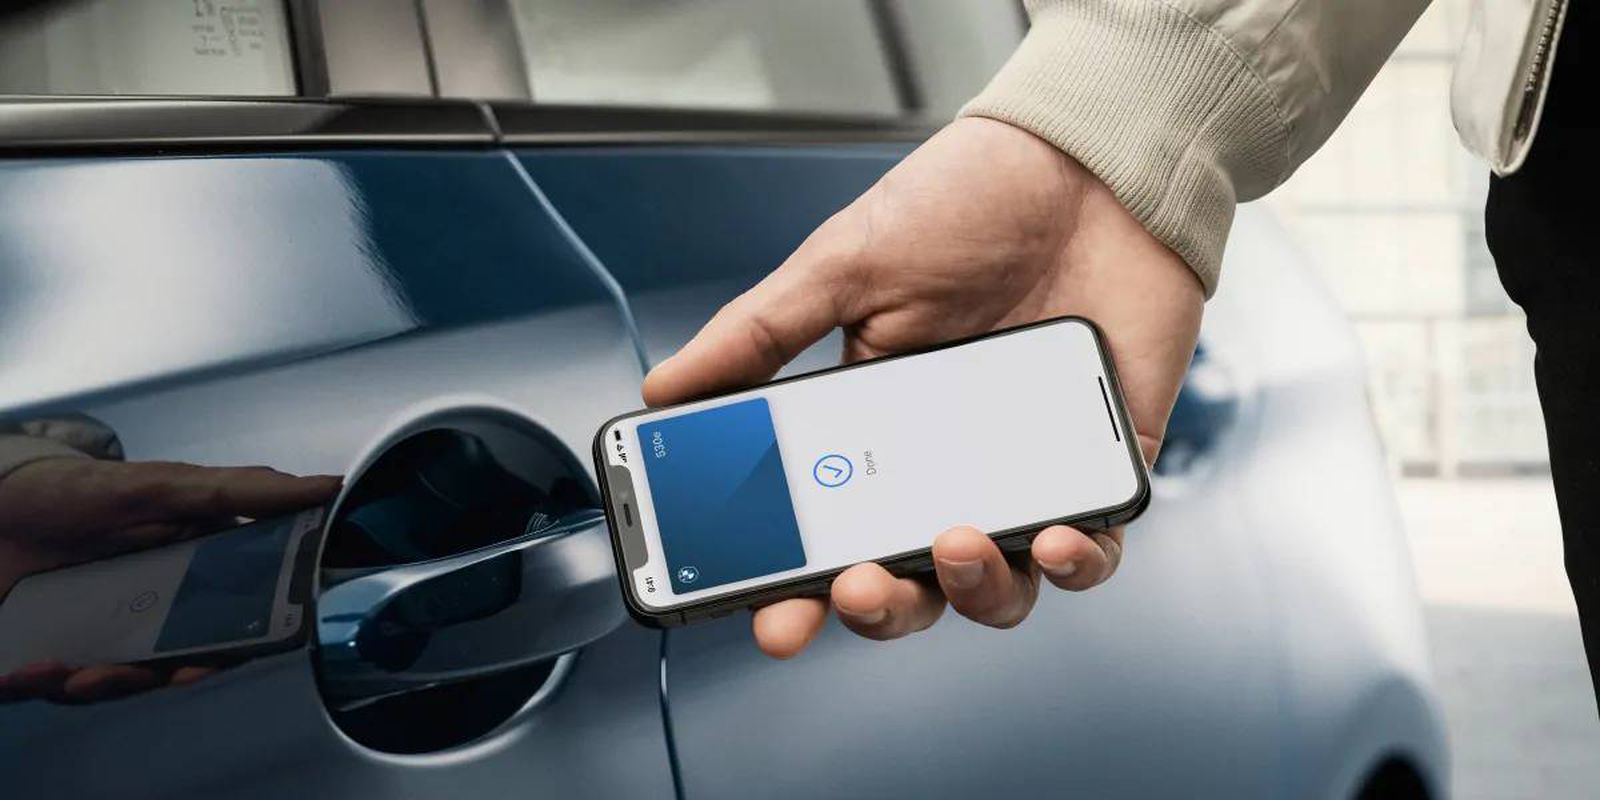 Apple Says iPhone's Car Key Feature Now Supports Select 2022 Genesis and Kia Vehicles - macrumors.com